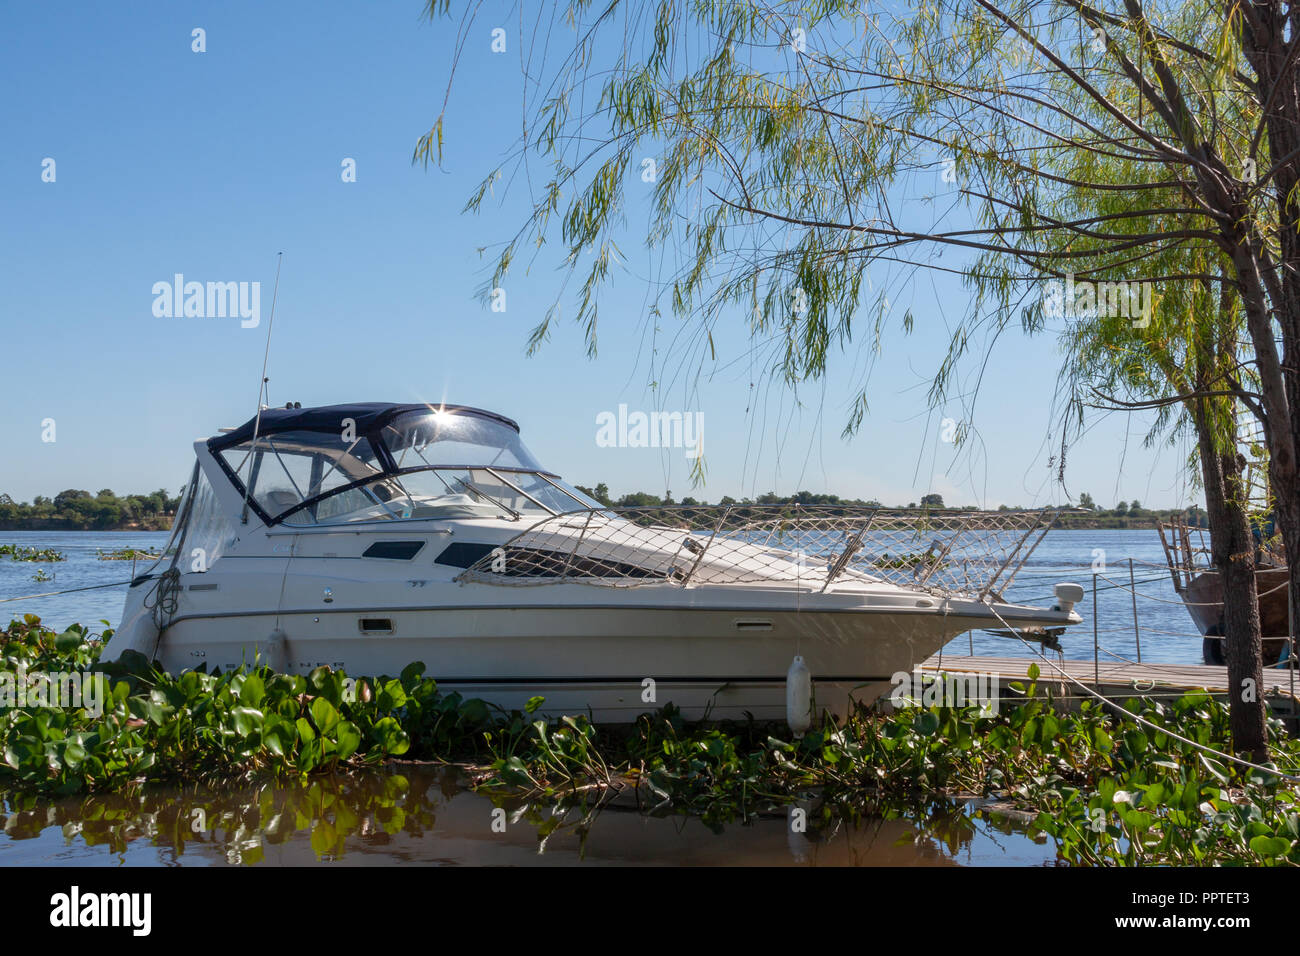 Boat at riverside, Rio (River) Paraguay on the background, Mariano Roque Alonso, Central Department, Paraguay Stock Photo